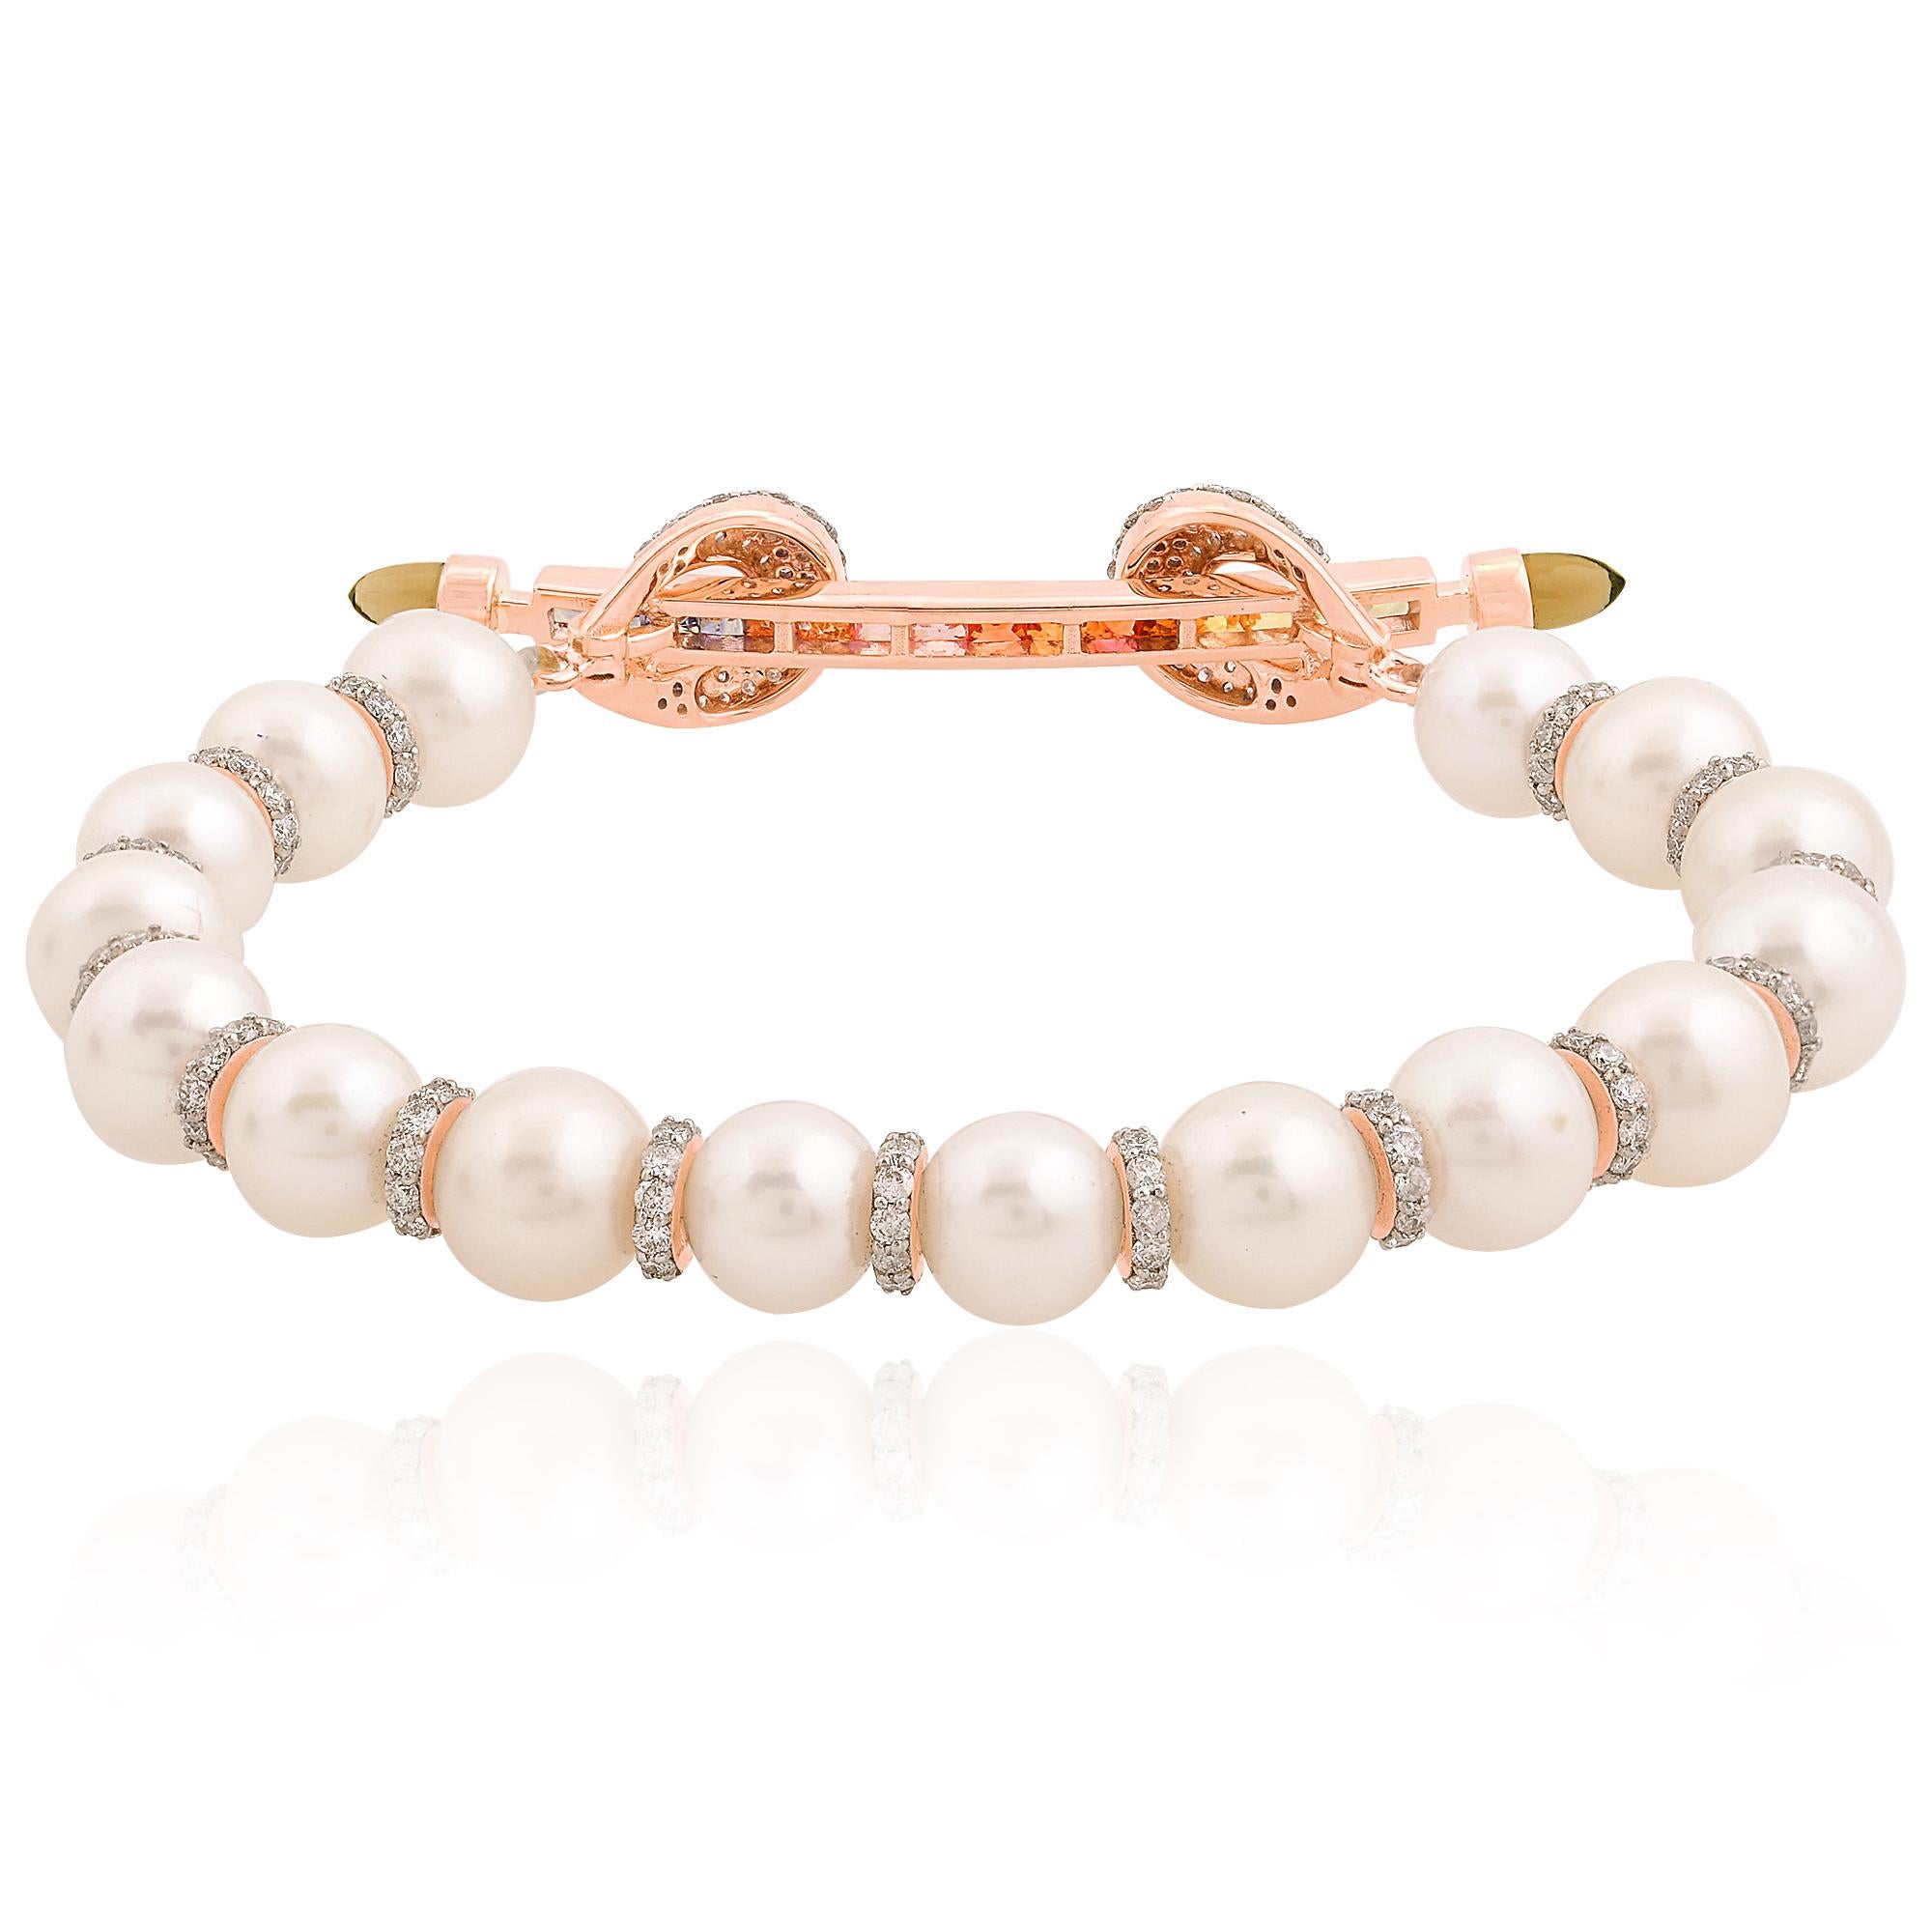 The bracelet itself is expertly crafted in solid 14k rose gold, renowned for its warm and romantic hue. The rose gold complements the colors of the gemstones and pearls, creating a cohesive and visually pleasing composition.

Item Code :- SEBR-41430